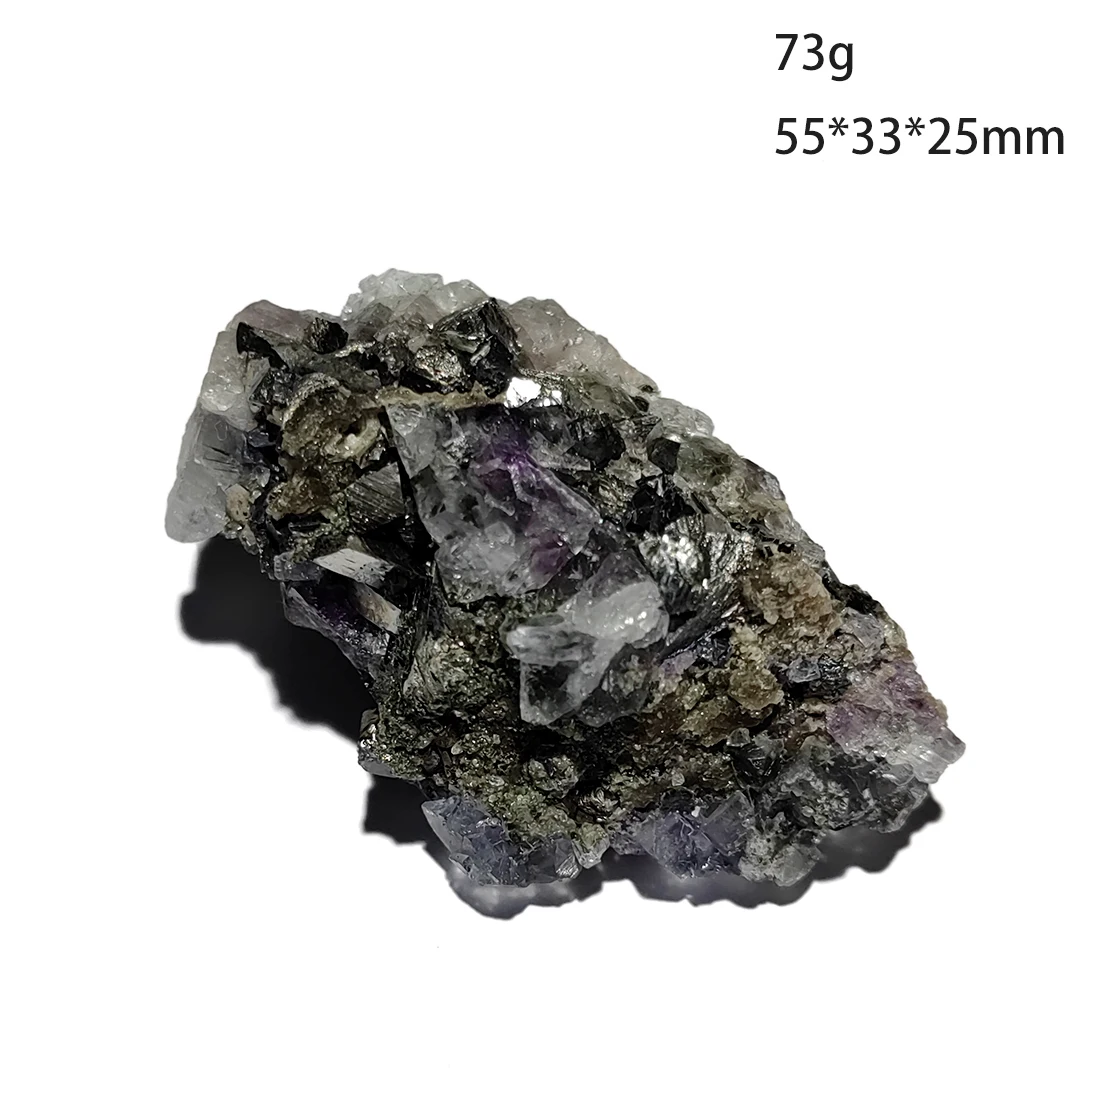 

C3-2D 100% Natural Purple Fluorite Arsenopyrite Mineral Crystal Specimen Collection From Yaogangxian Hunan Province China